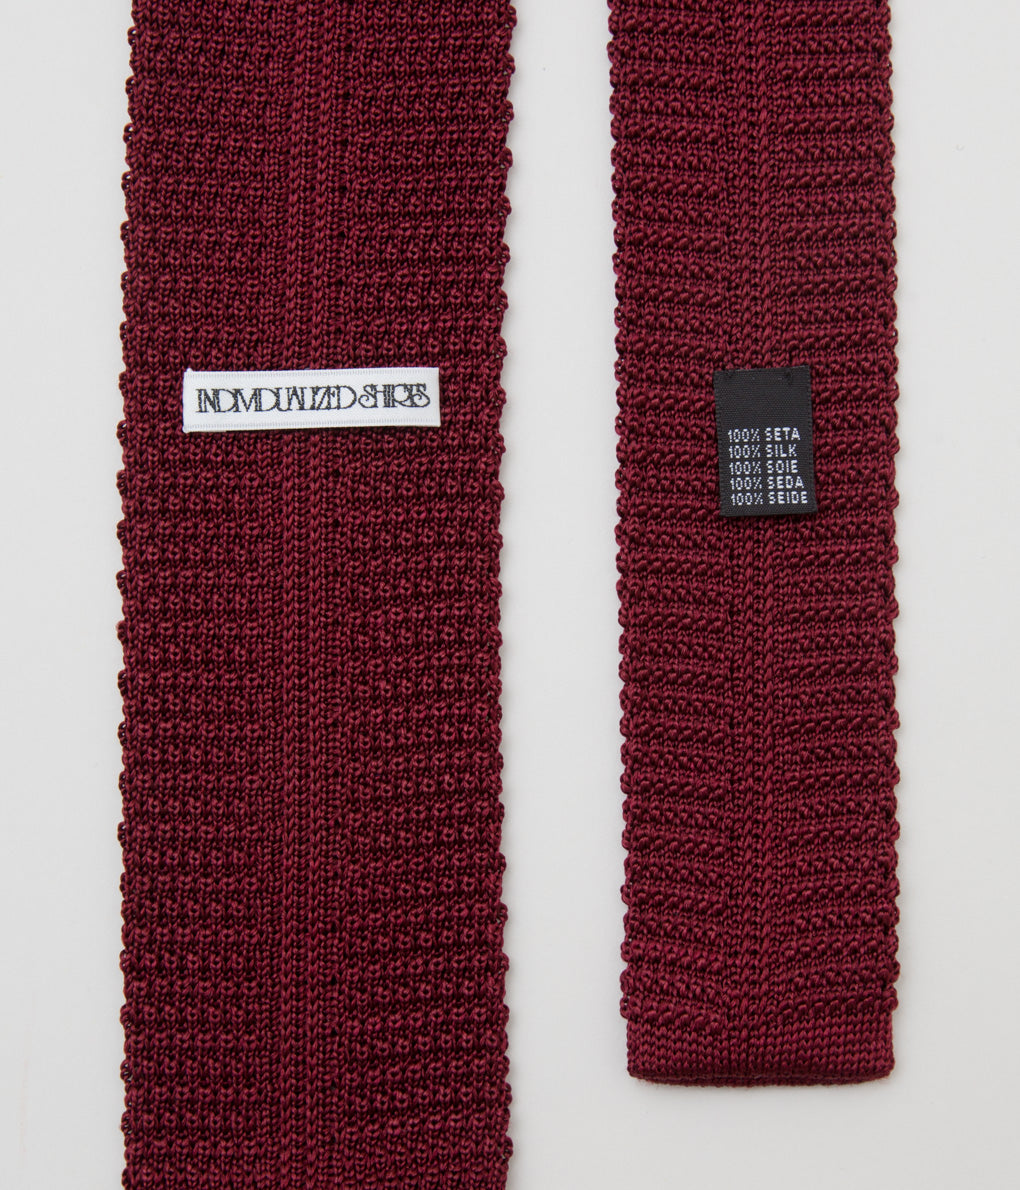 INDIVIDUALIZED ACCESSORIES"KNIT TIE"(BURGUNDY)